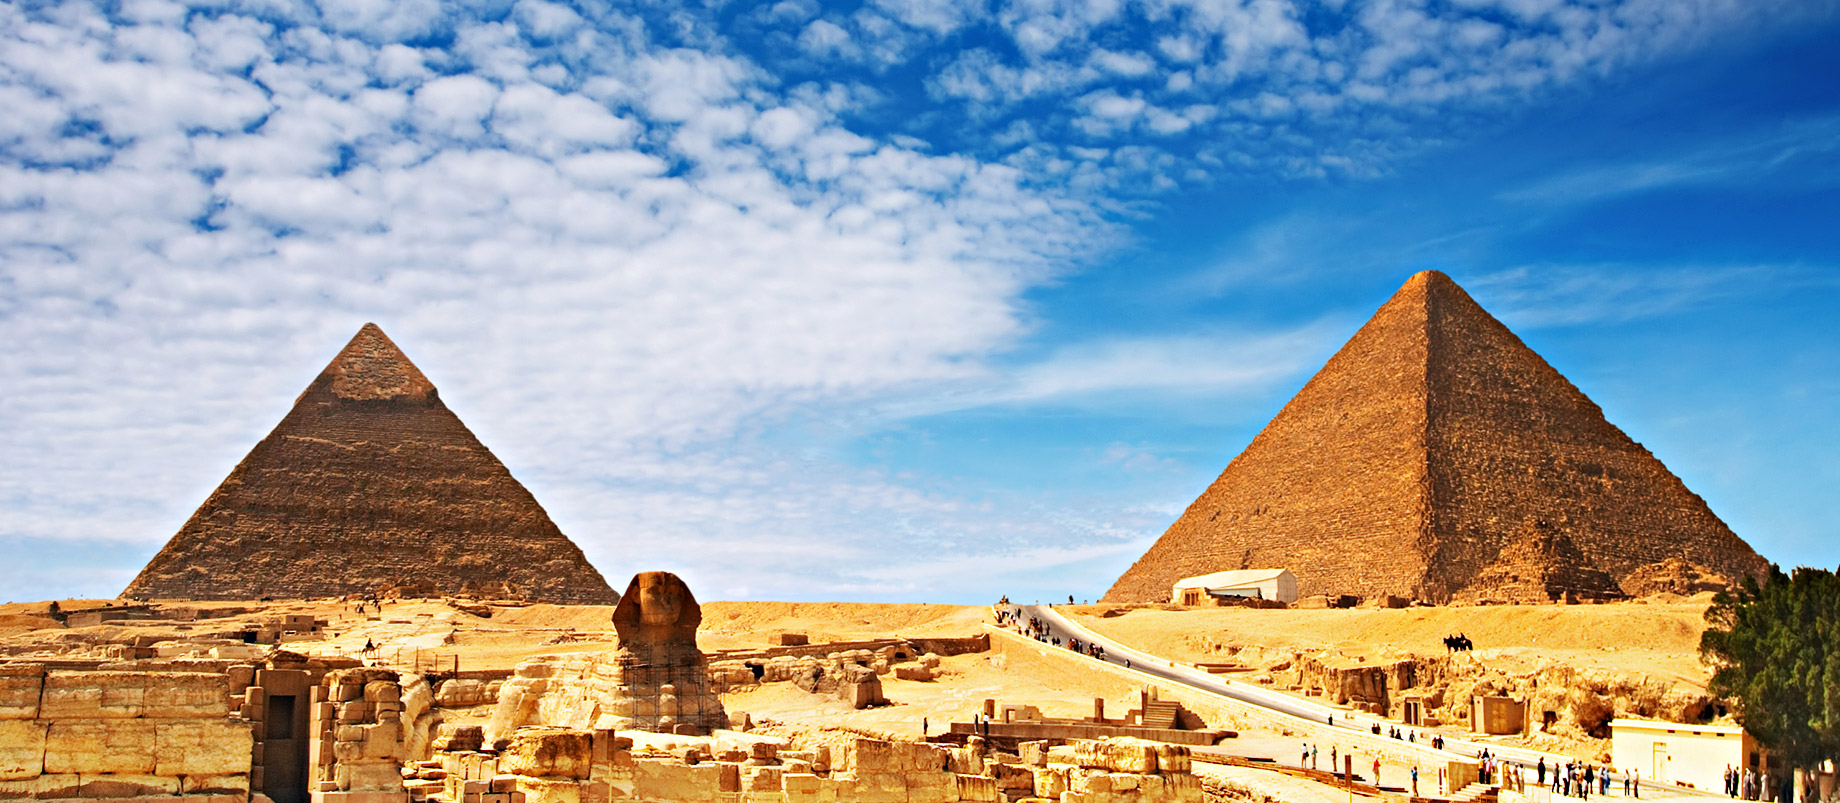 Visiting The Great Sphinx and The Great Pyramids of Giza, Egypt